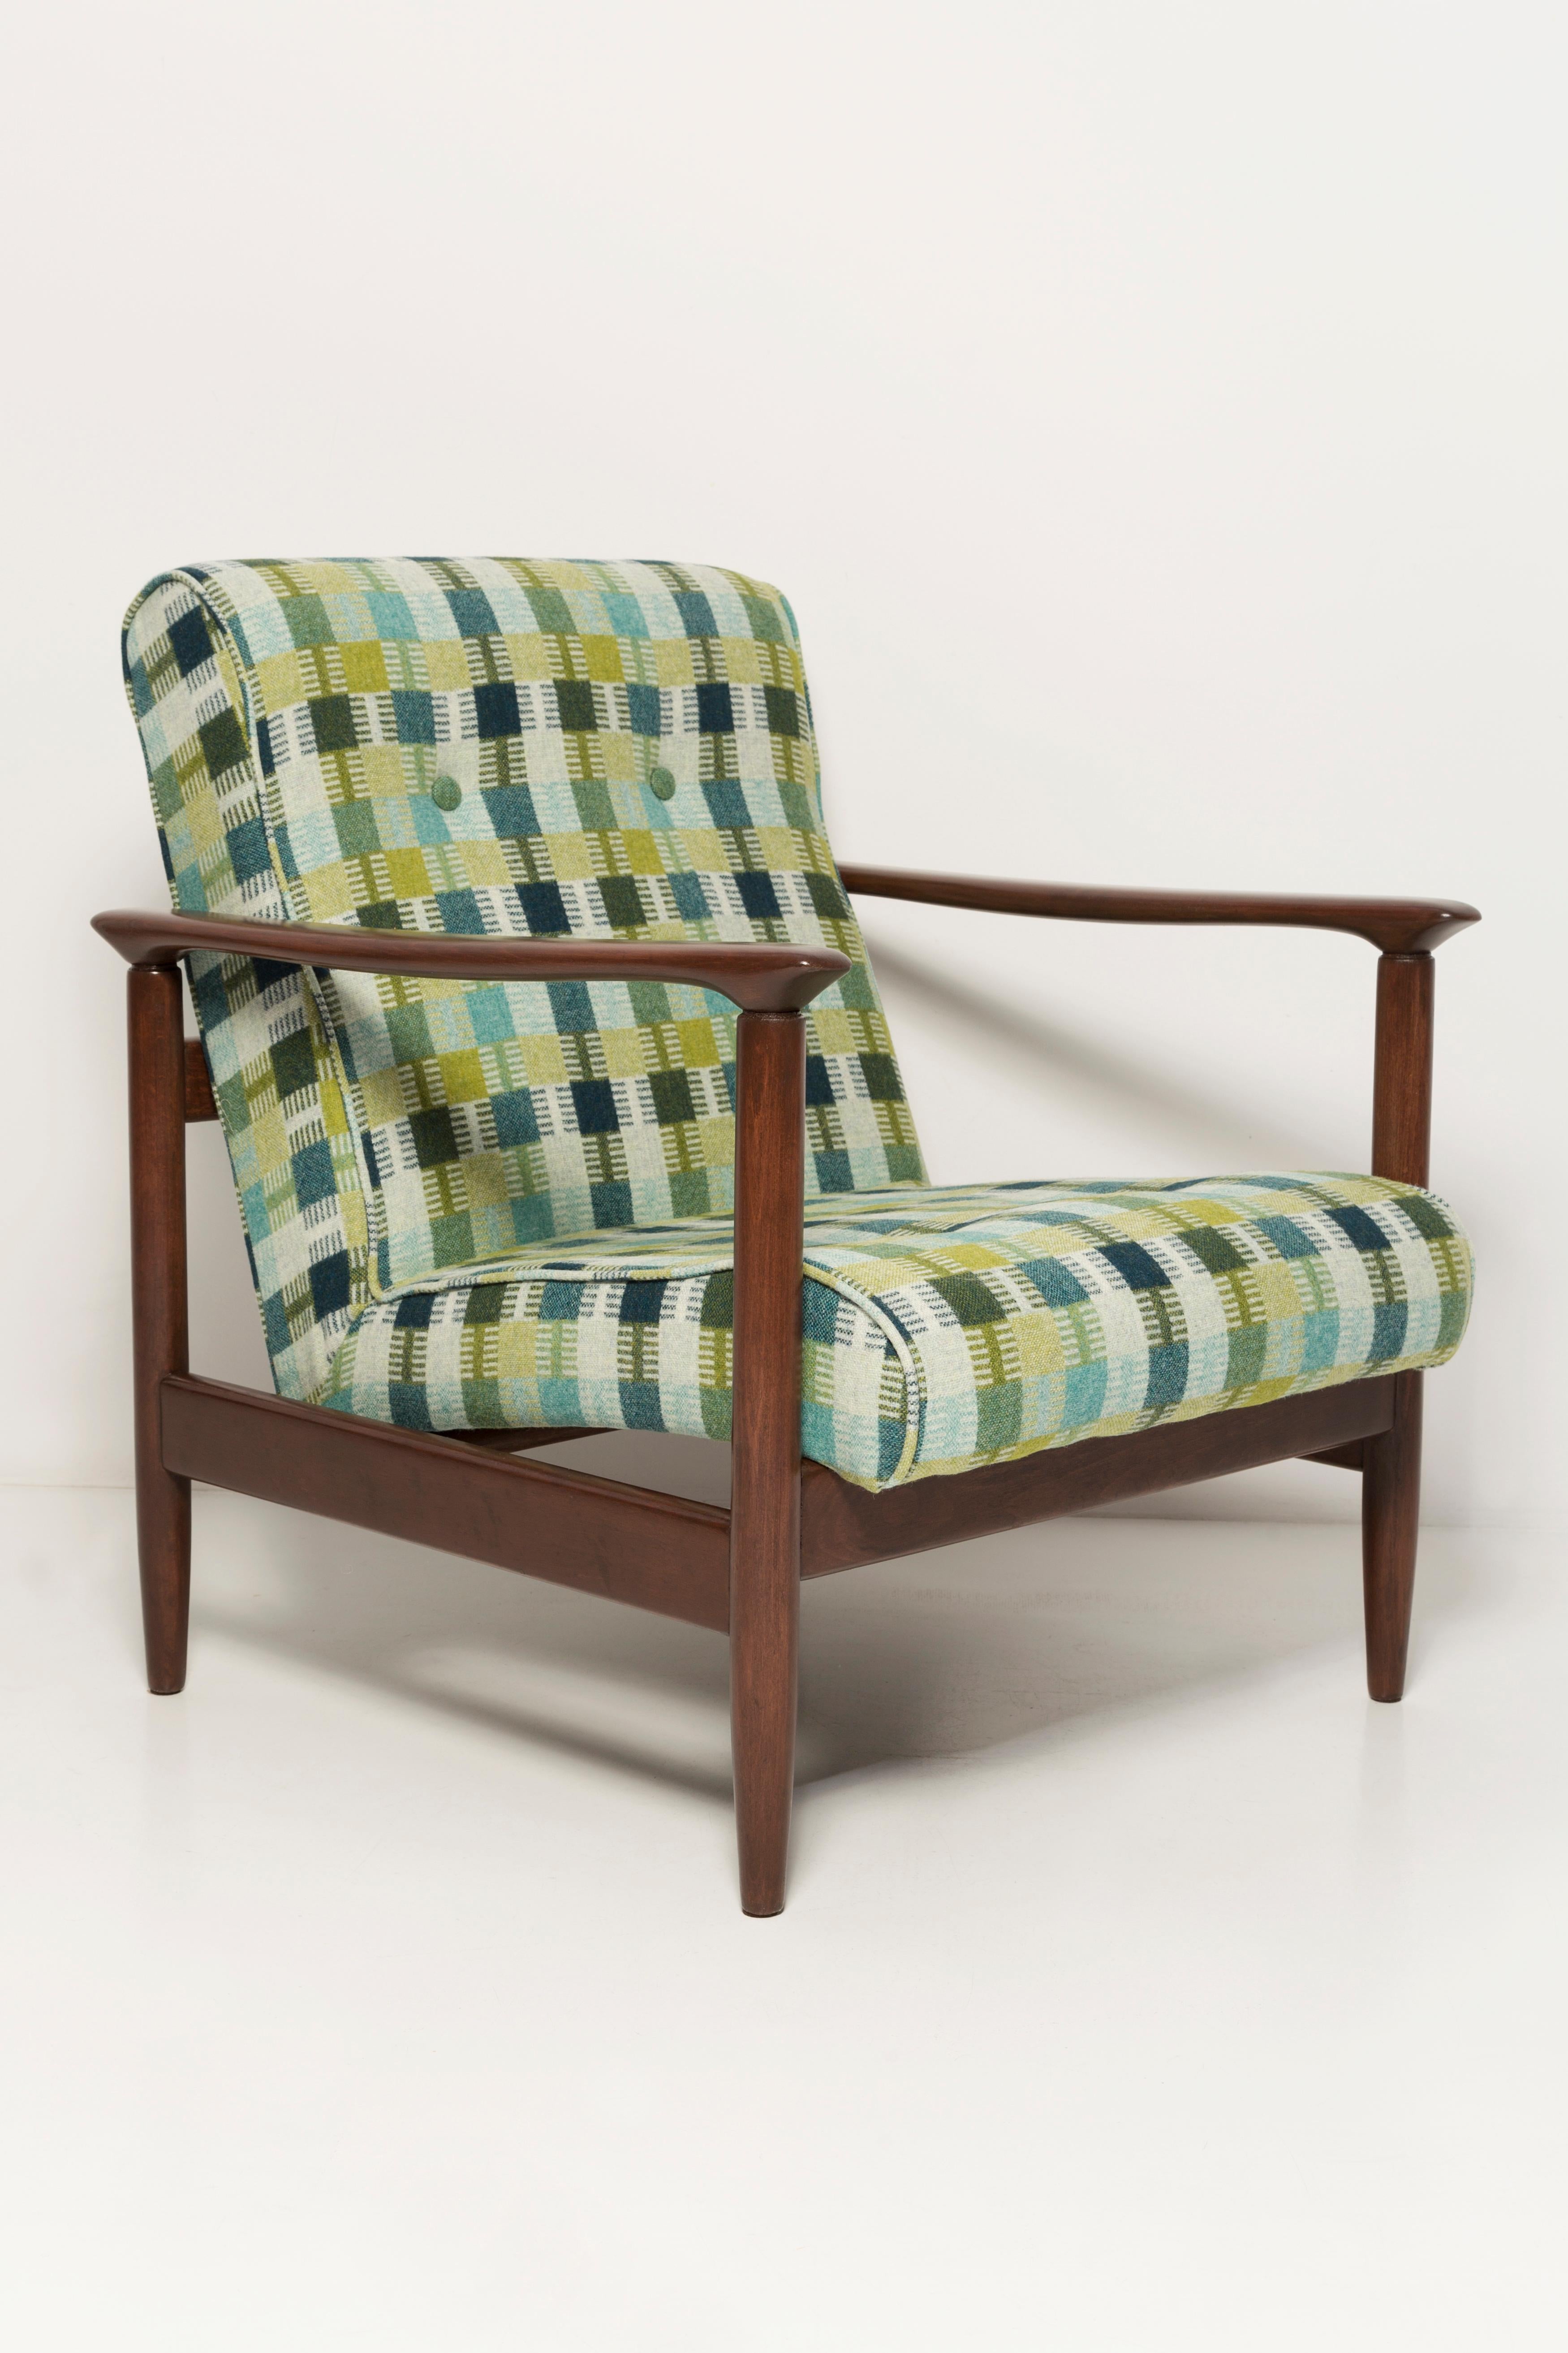 Beautiful Green Wool Armchair GFM-142, designed by Edmund Homa, a polish architect, designer of Industrial Design and interior architecture, professor at the Academy of Fine Arts in Gdansk. 

The armchair was made in the 1960s in the Gosciecinska